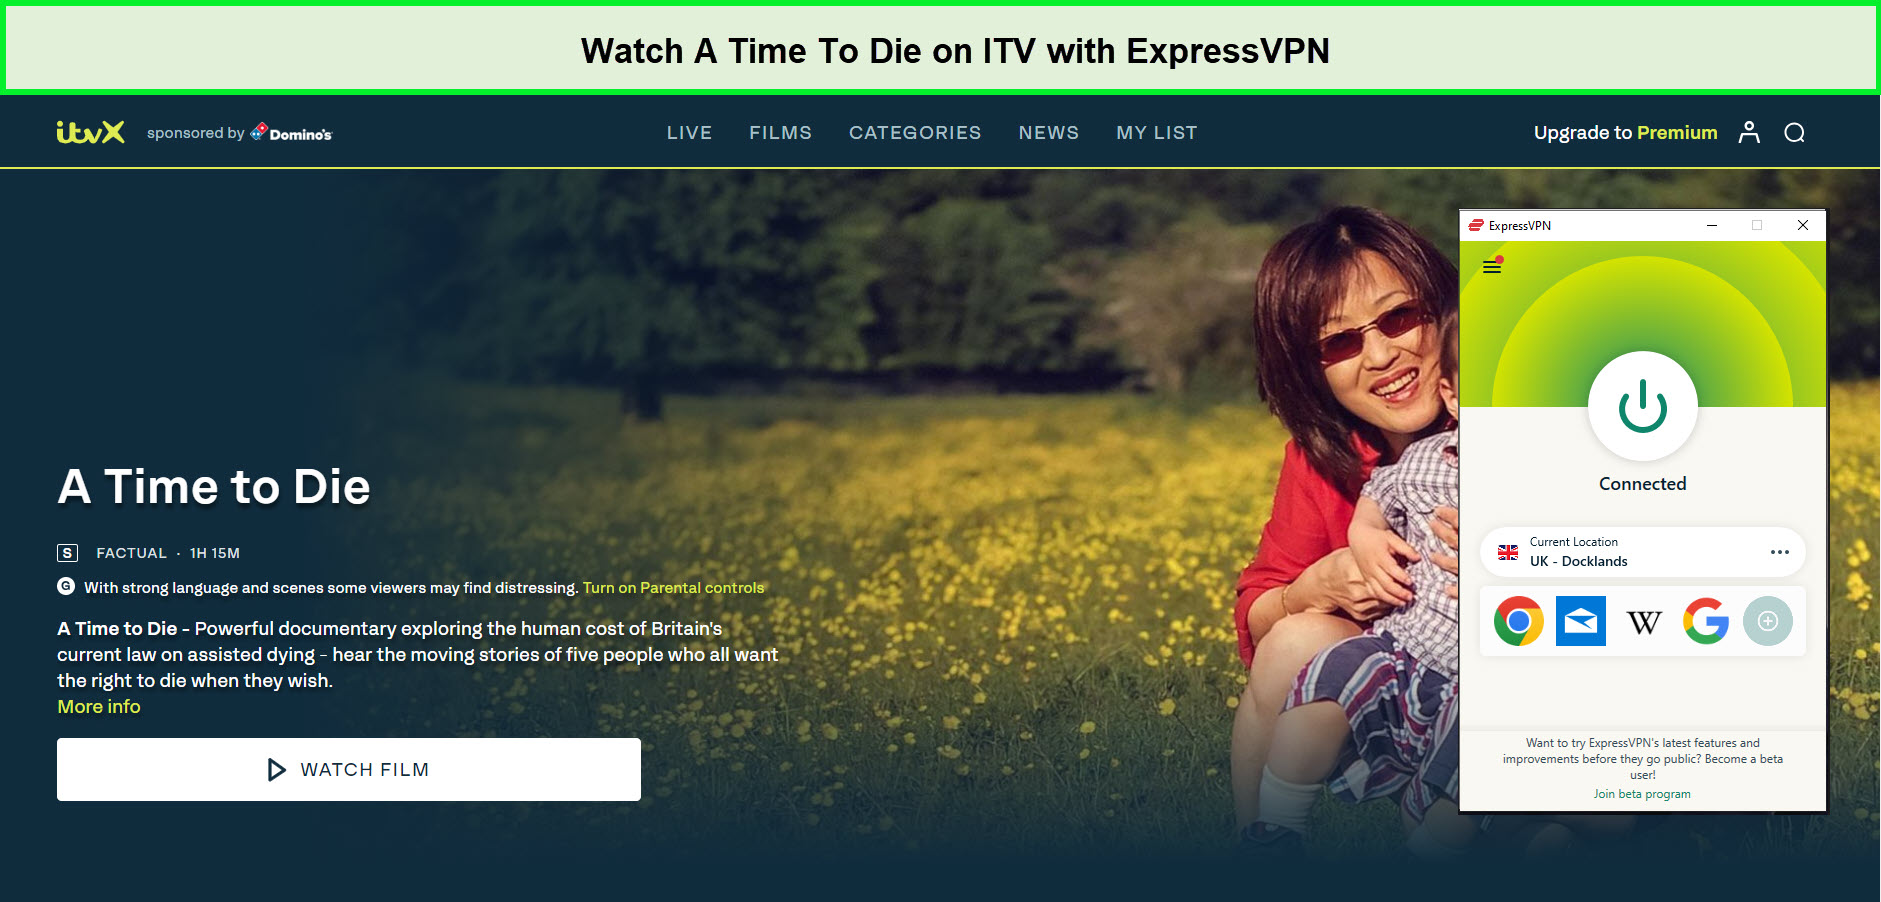 Watch-A-Time-To-Die-in-Netherlands-on-ITV-with-ExpressVPN